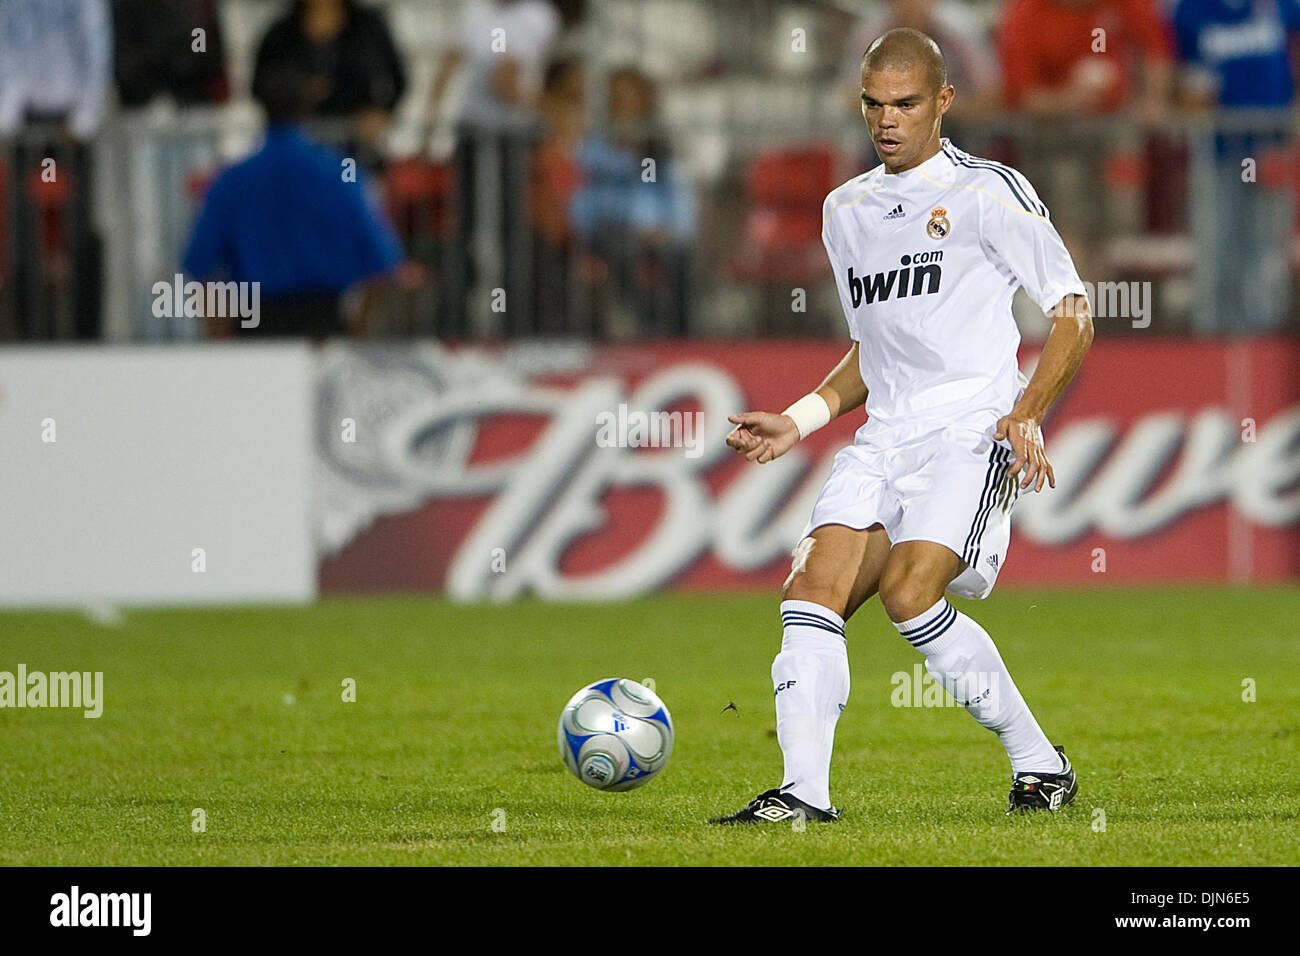 07 August 2009: Real Madrid defender Kepler Laveran Lima Ferreira (Pepe) #3 in action during a FIFA international friendly soccer match between Real Madrid and Toronto FC at BMO Field in Toronto..Real Madrid won 5-1. (Credit Image: © Southcreek Global/ZUMApress.com) Stock Photo